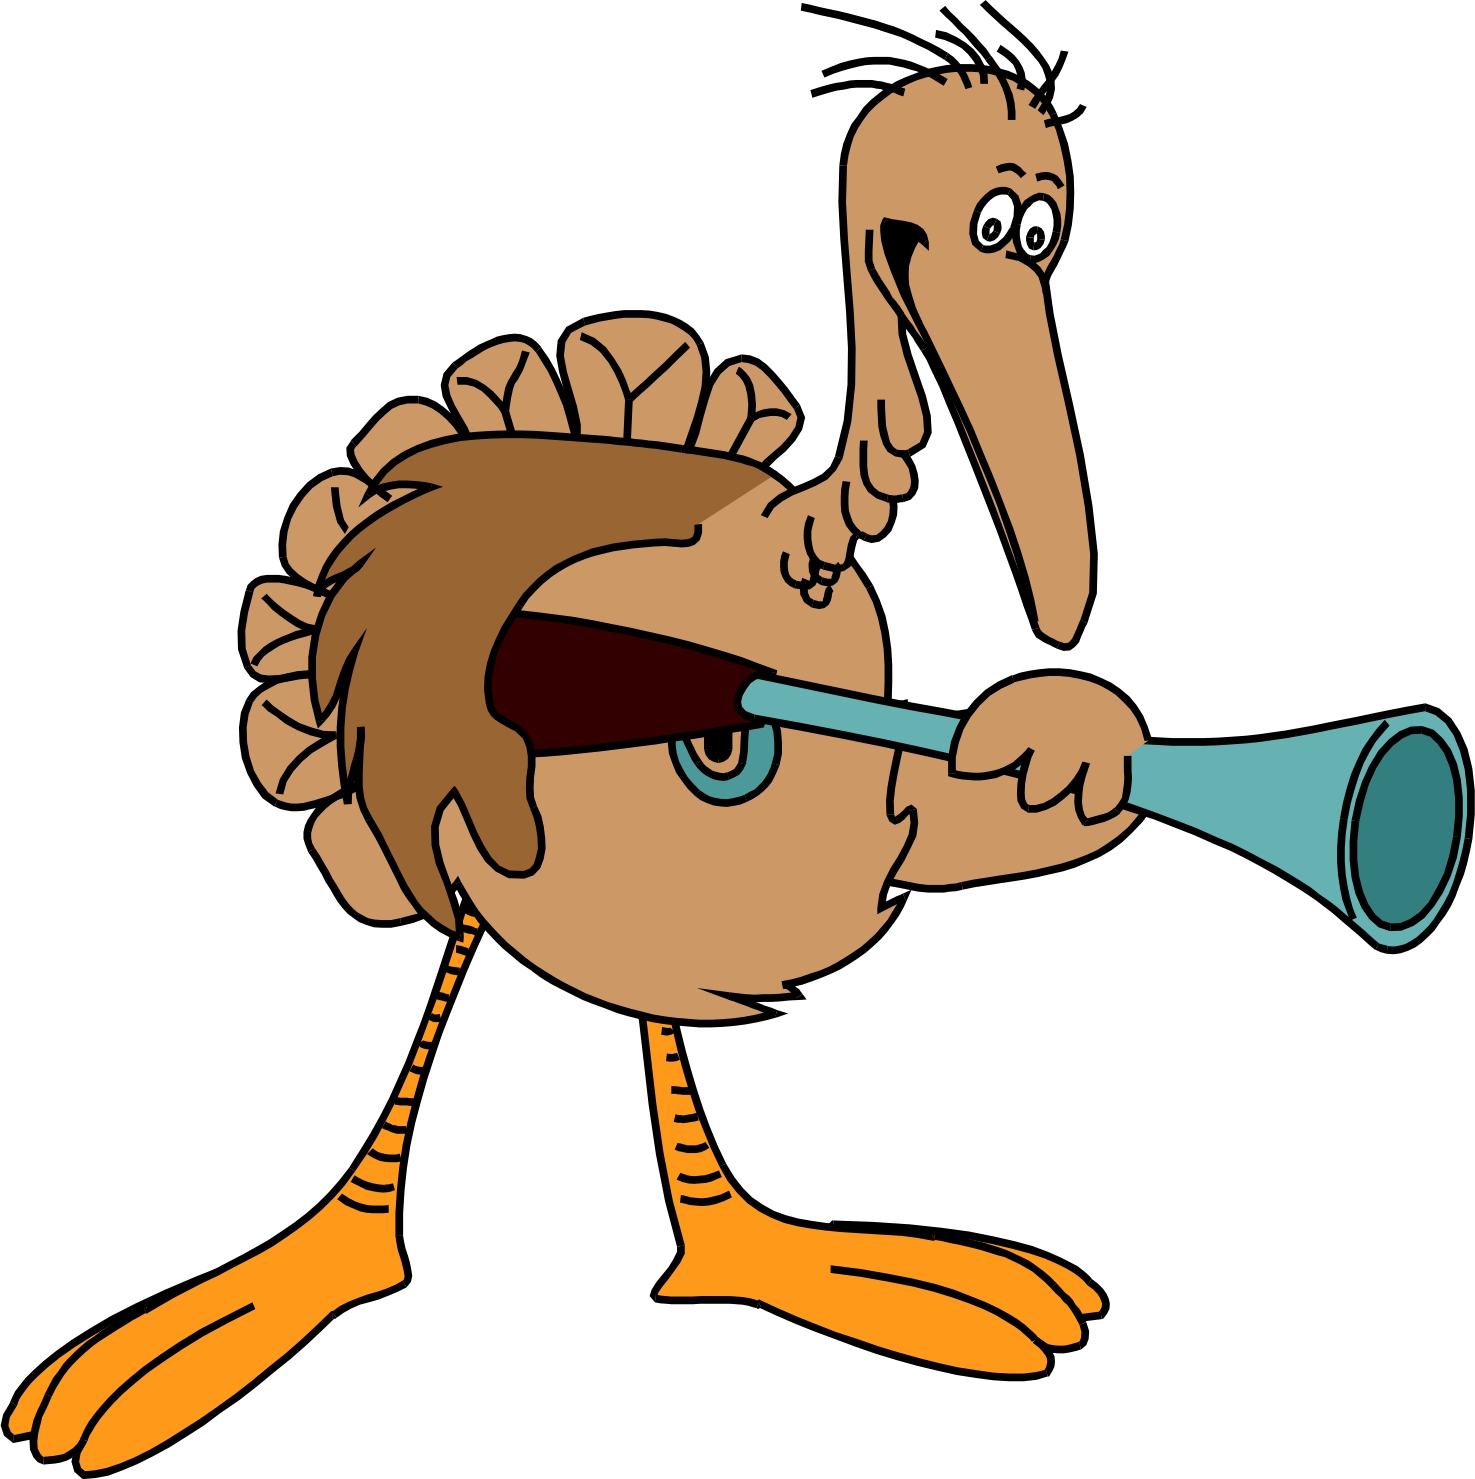 Picture Of Cartoon Turkey - Clipart library